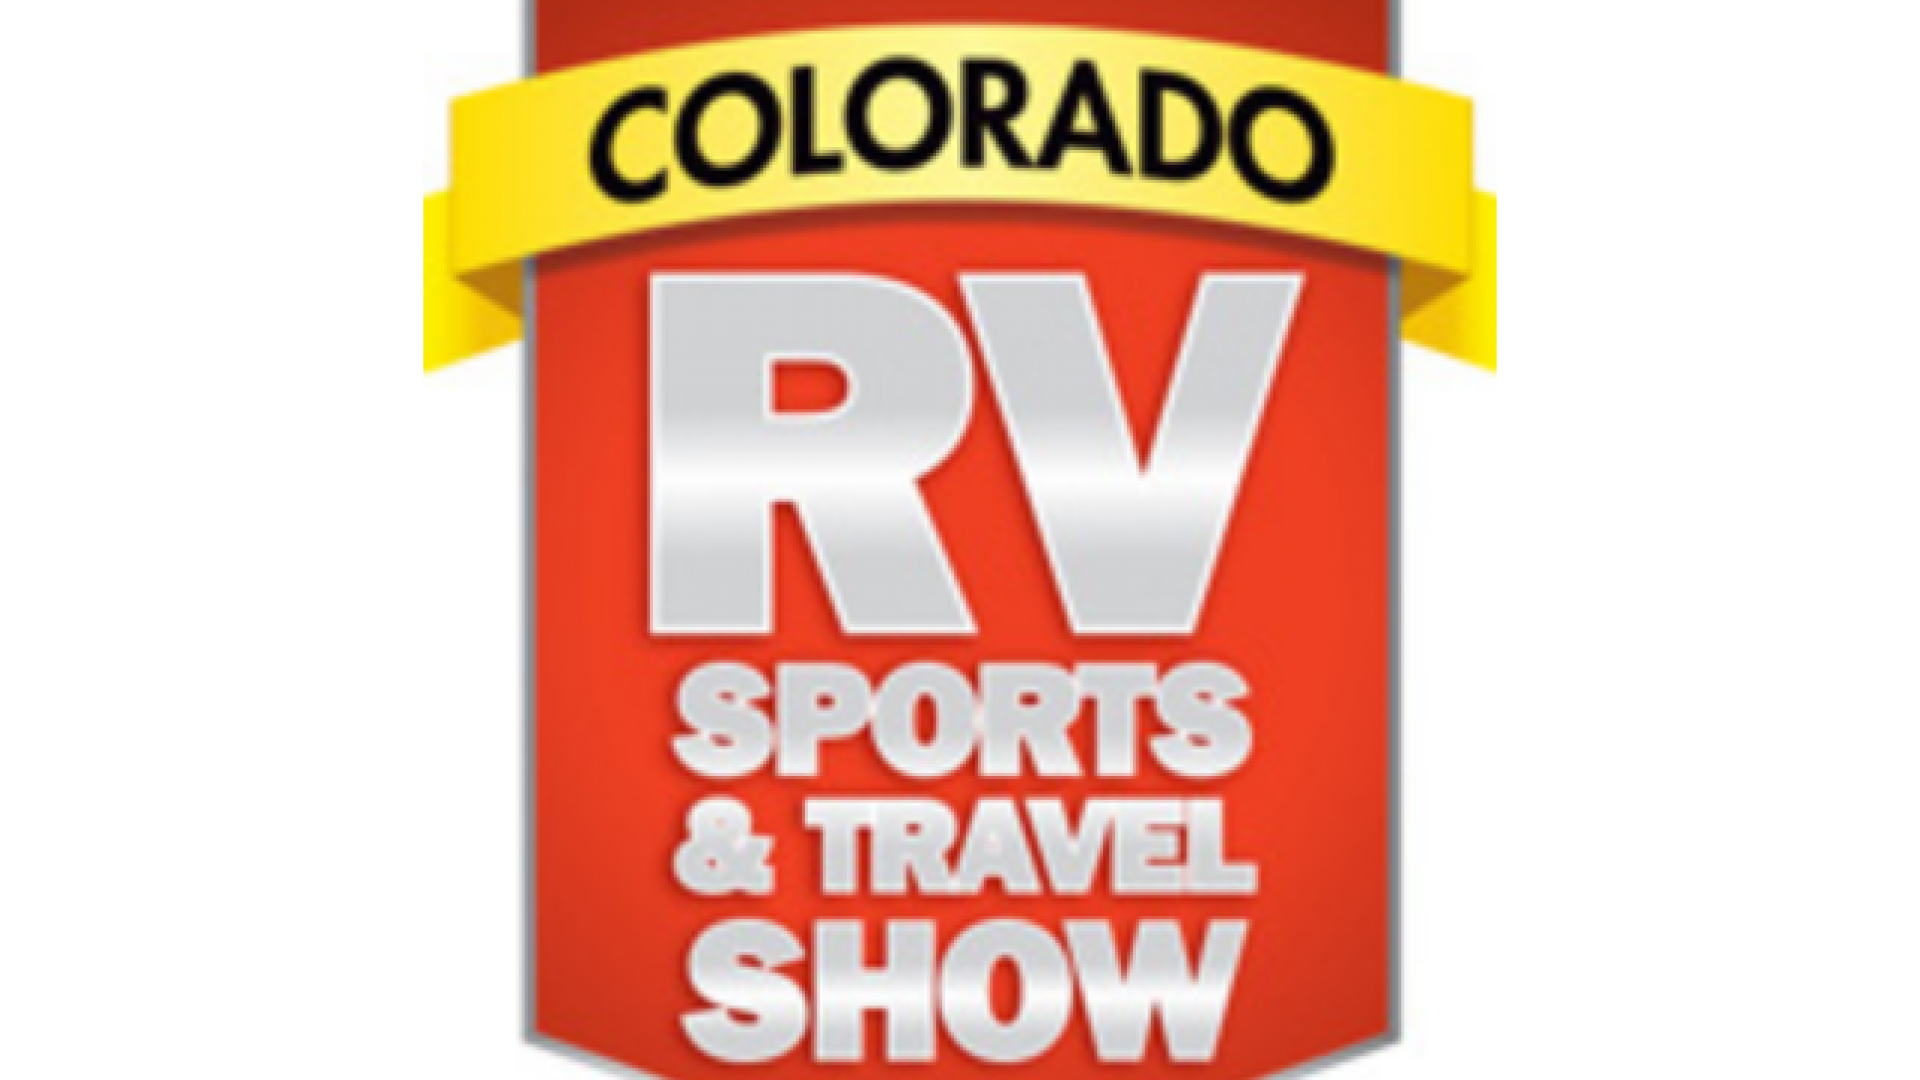 Colorado RV Sports & Travel Show GDRV4Life Your Connection to the